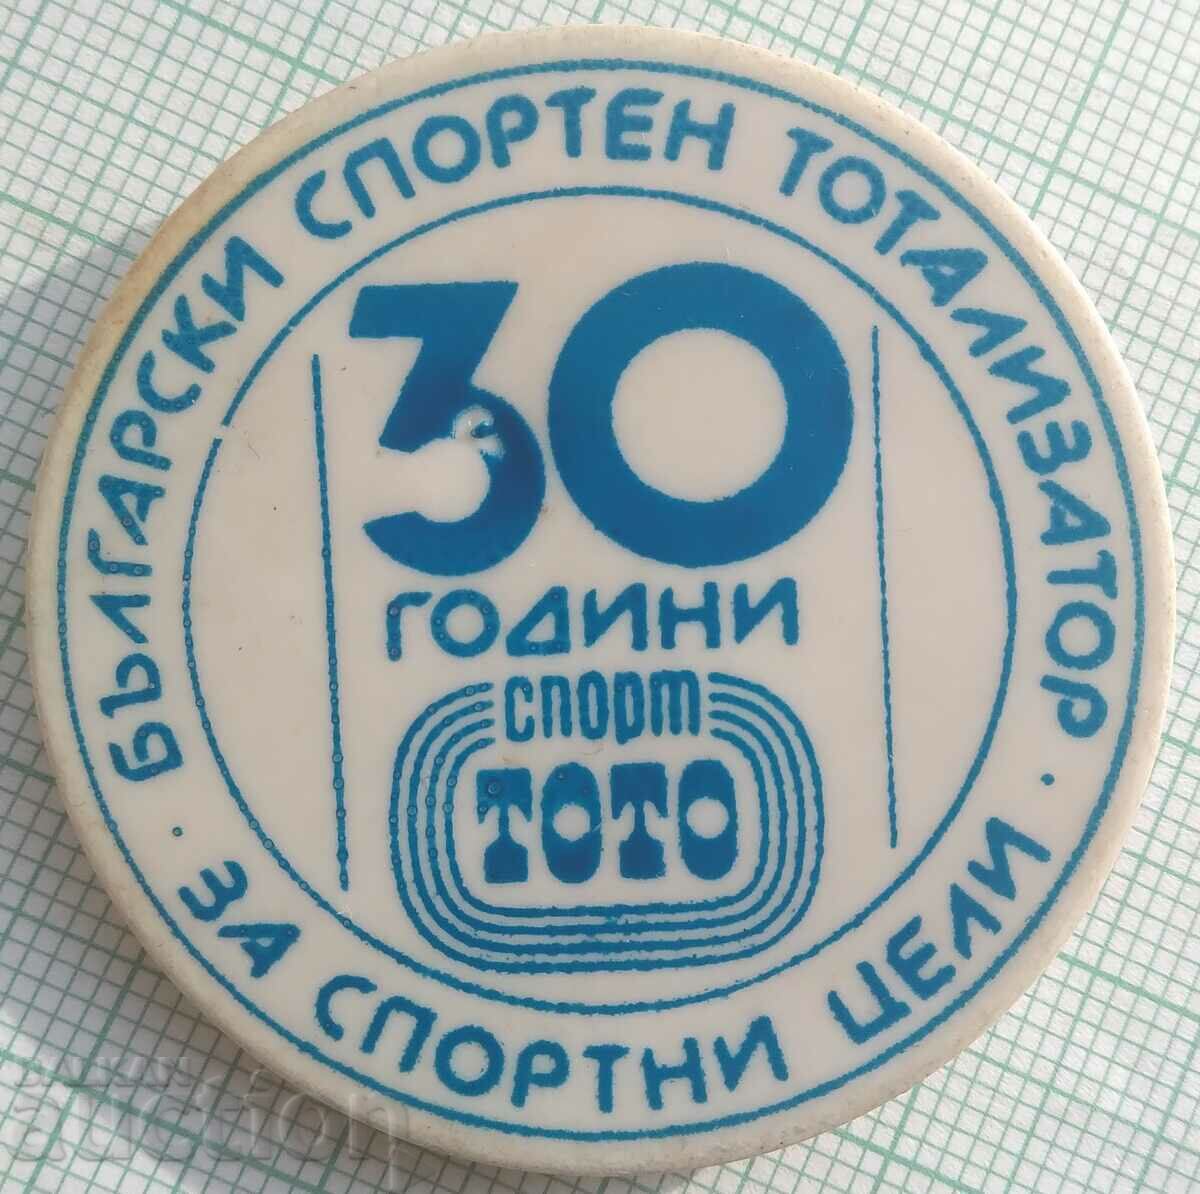 15117 Bulgarian sports totalizer 30 years Sport Toto